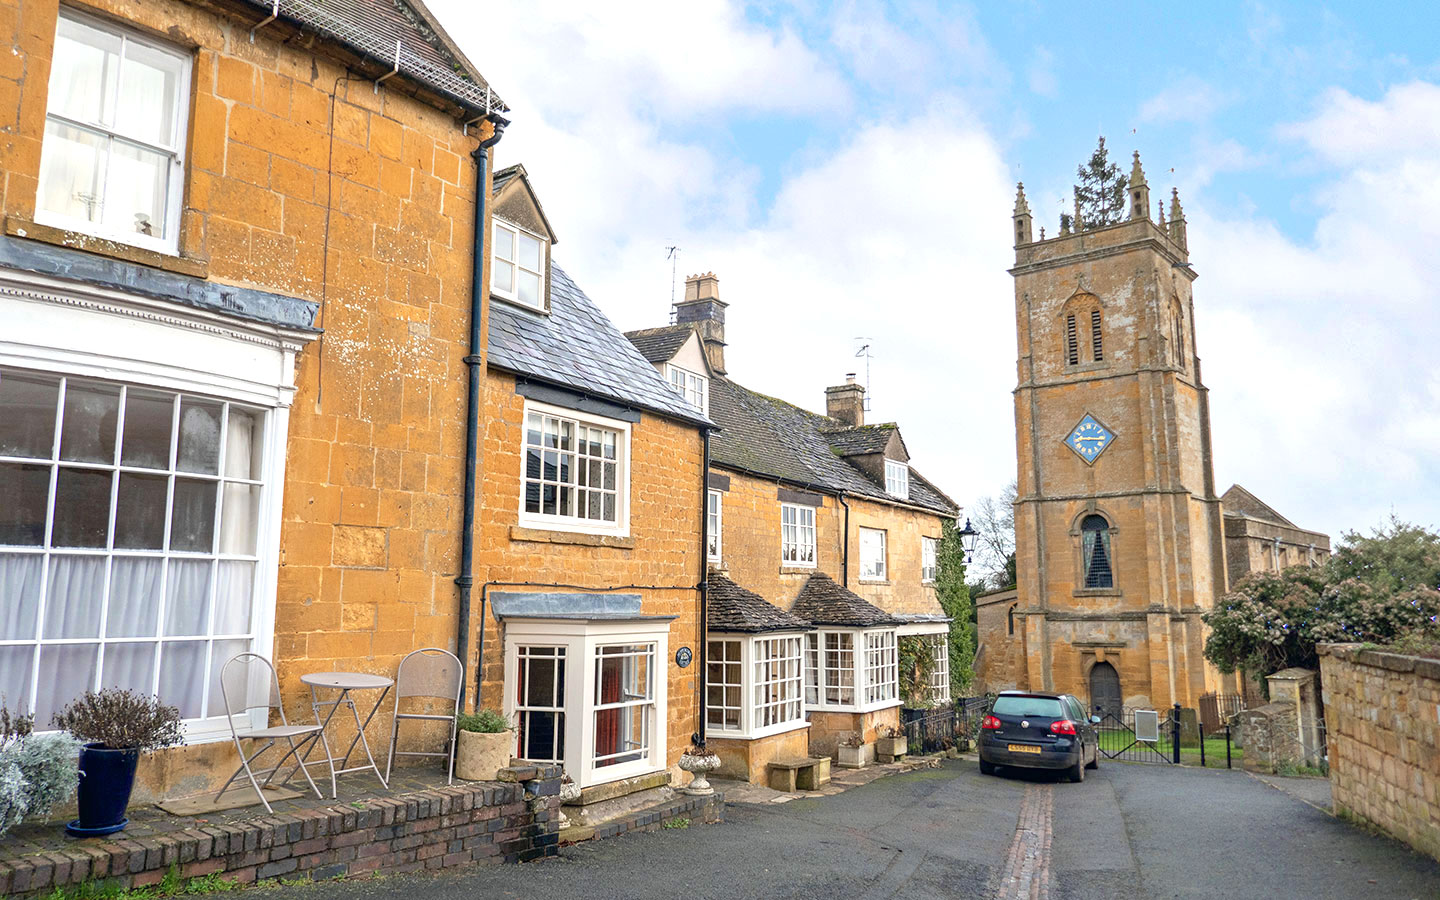 Things to do in Blockley, Cotswolds: A local’s guide